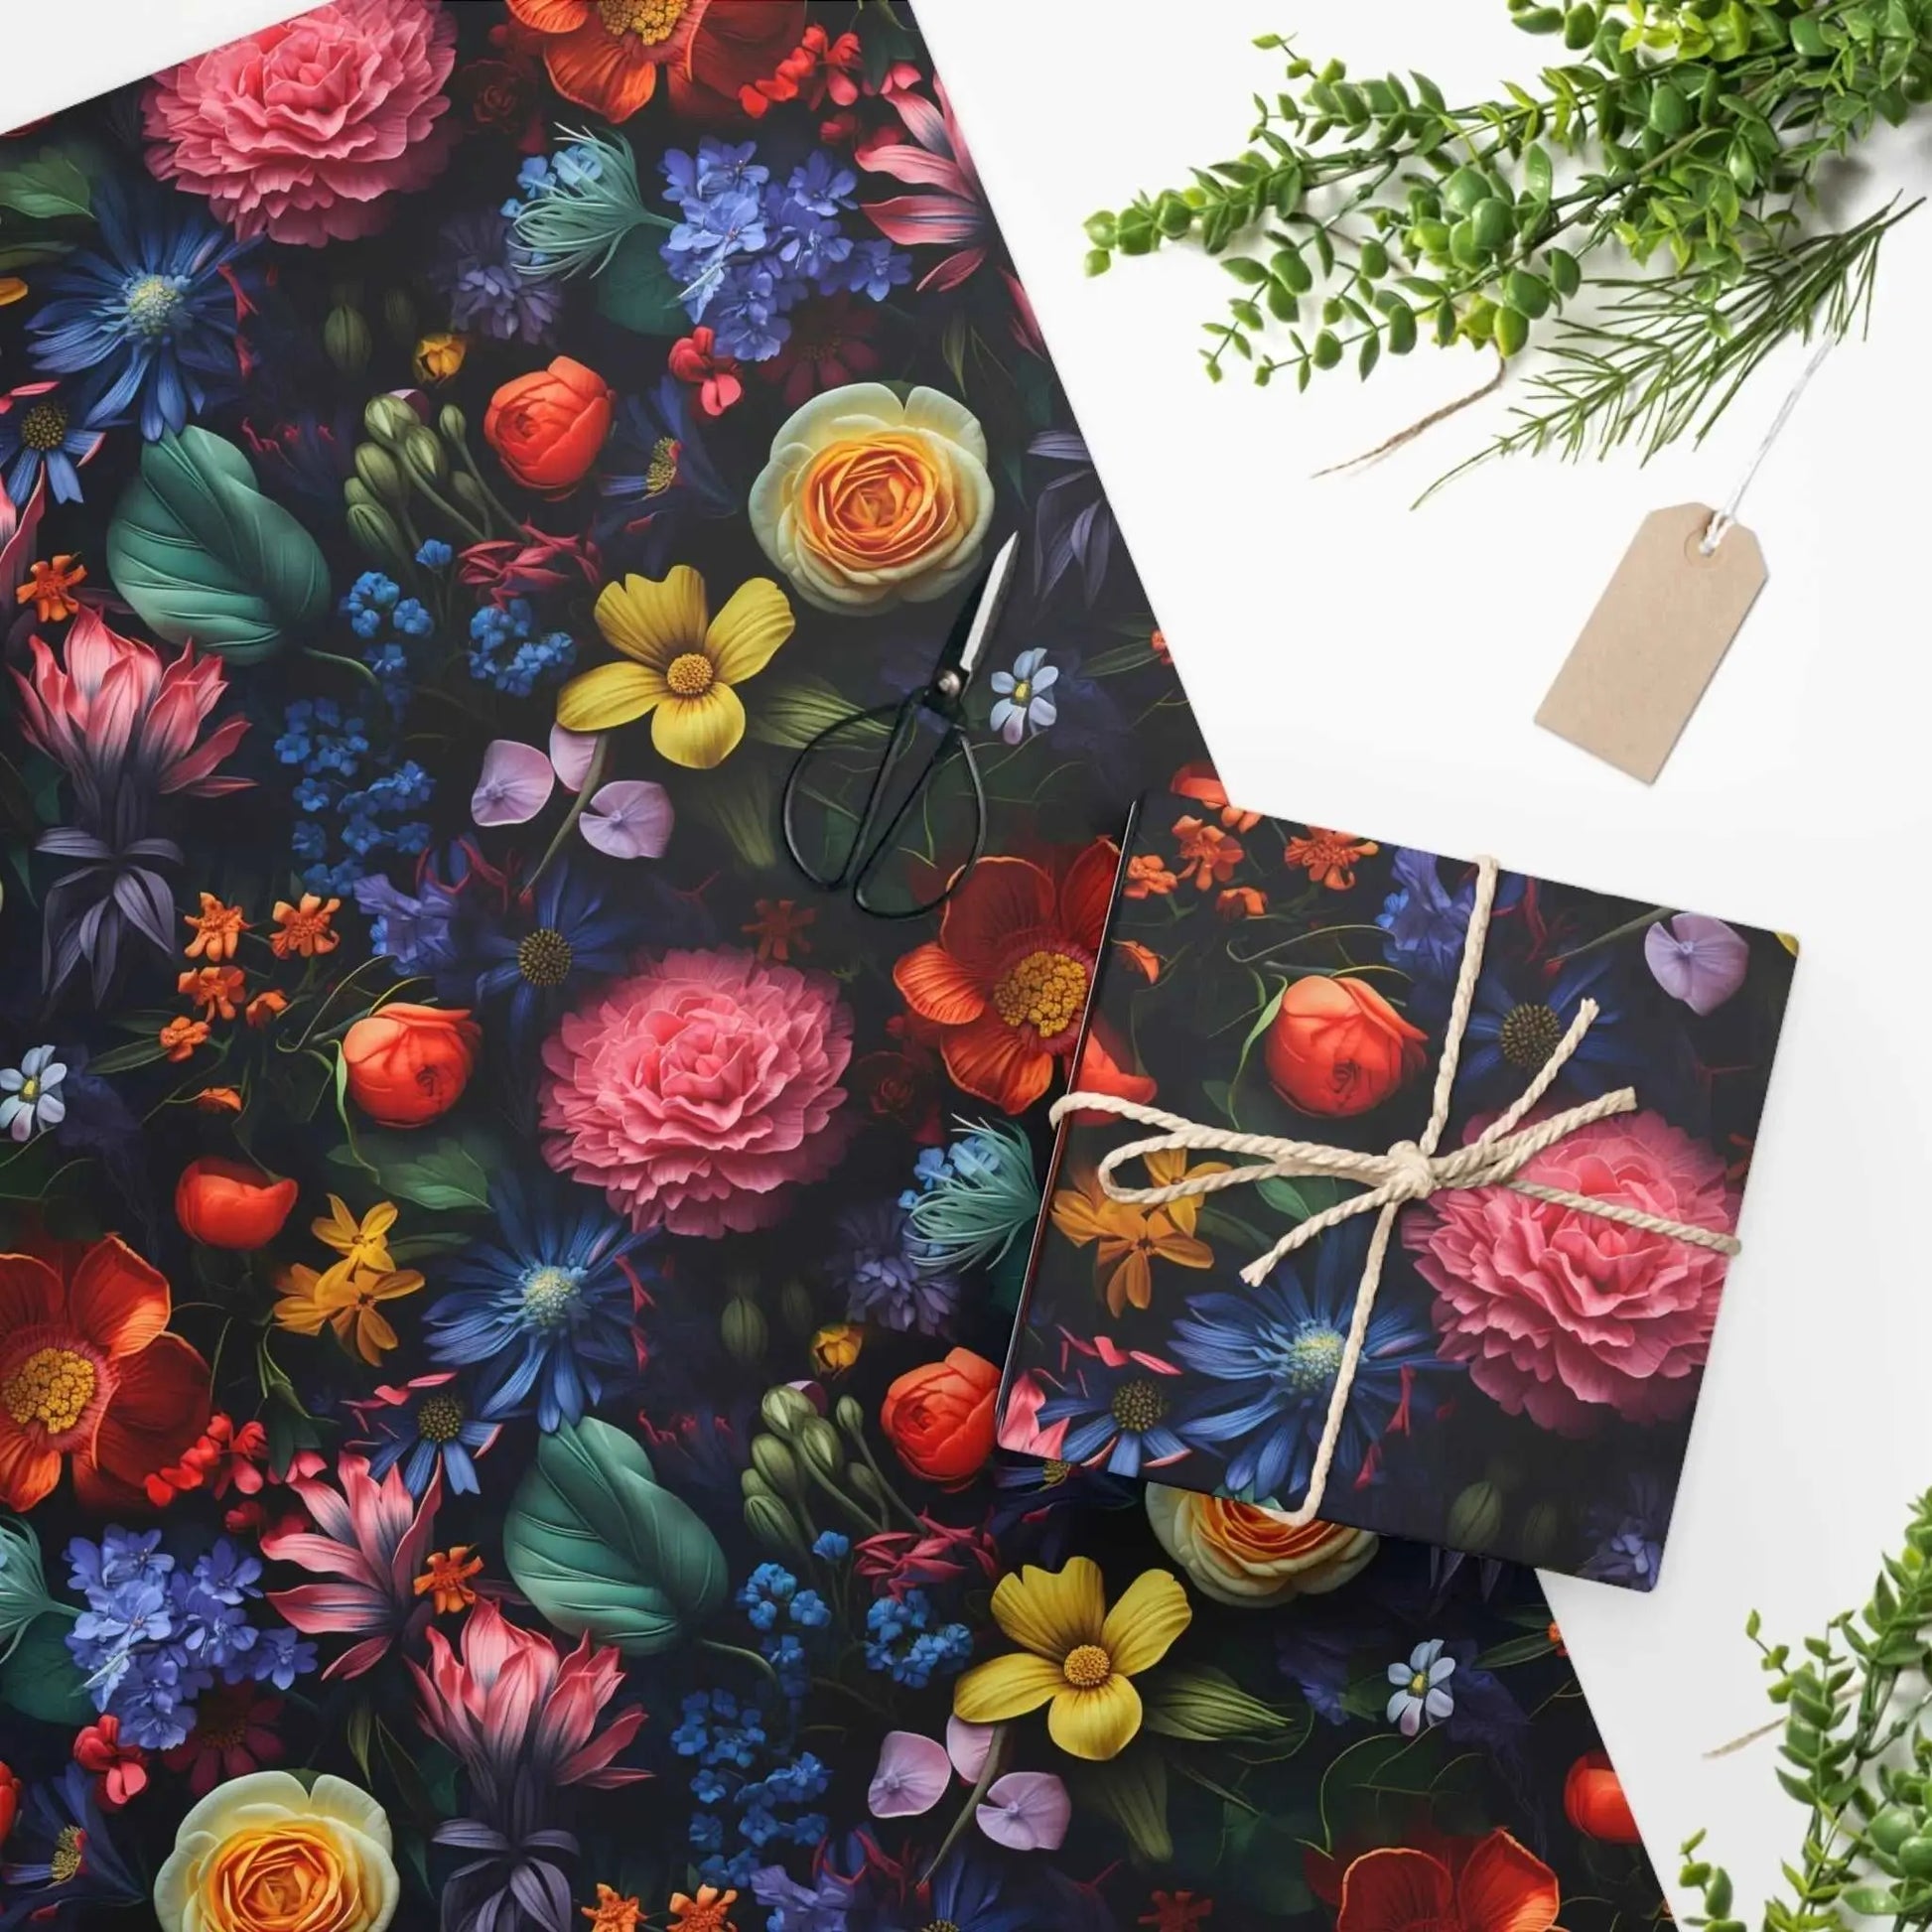 Moody and Dark Floral Wrapping Paper - The Curated Goose